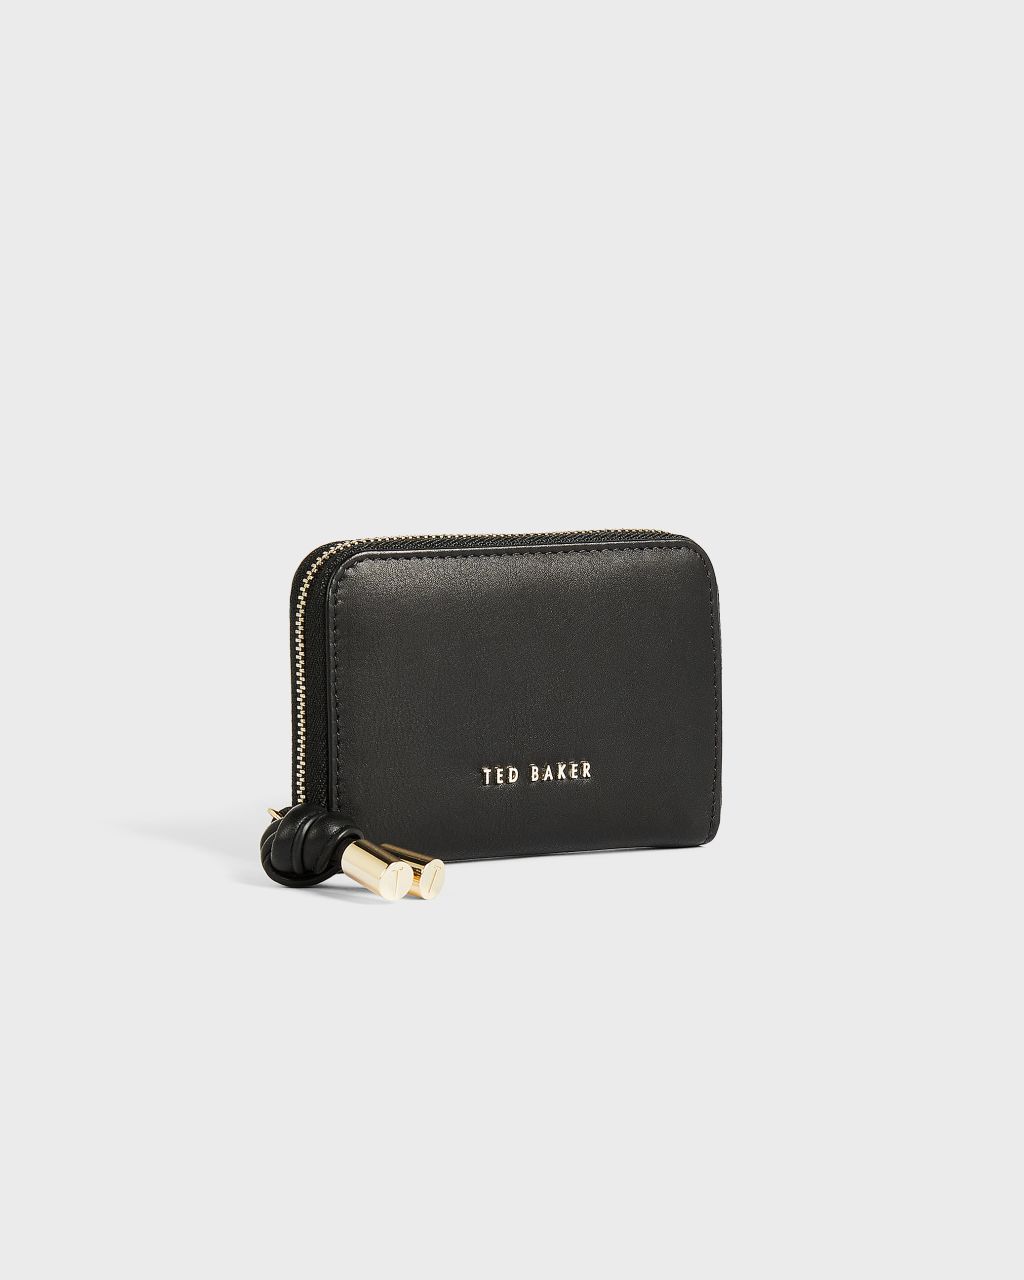 Ted Baker Women's Knotted Leather Zip Around Mini Purse in Black, Moolah